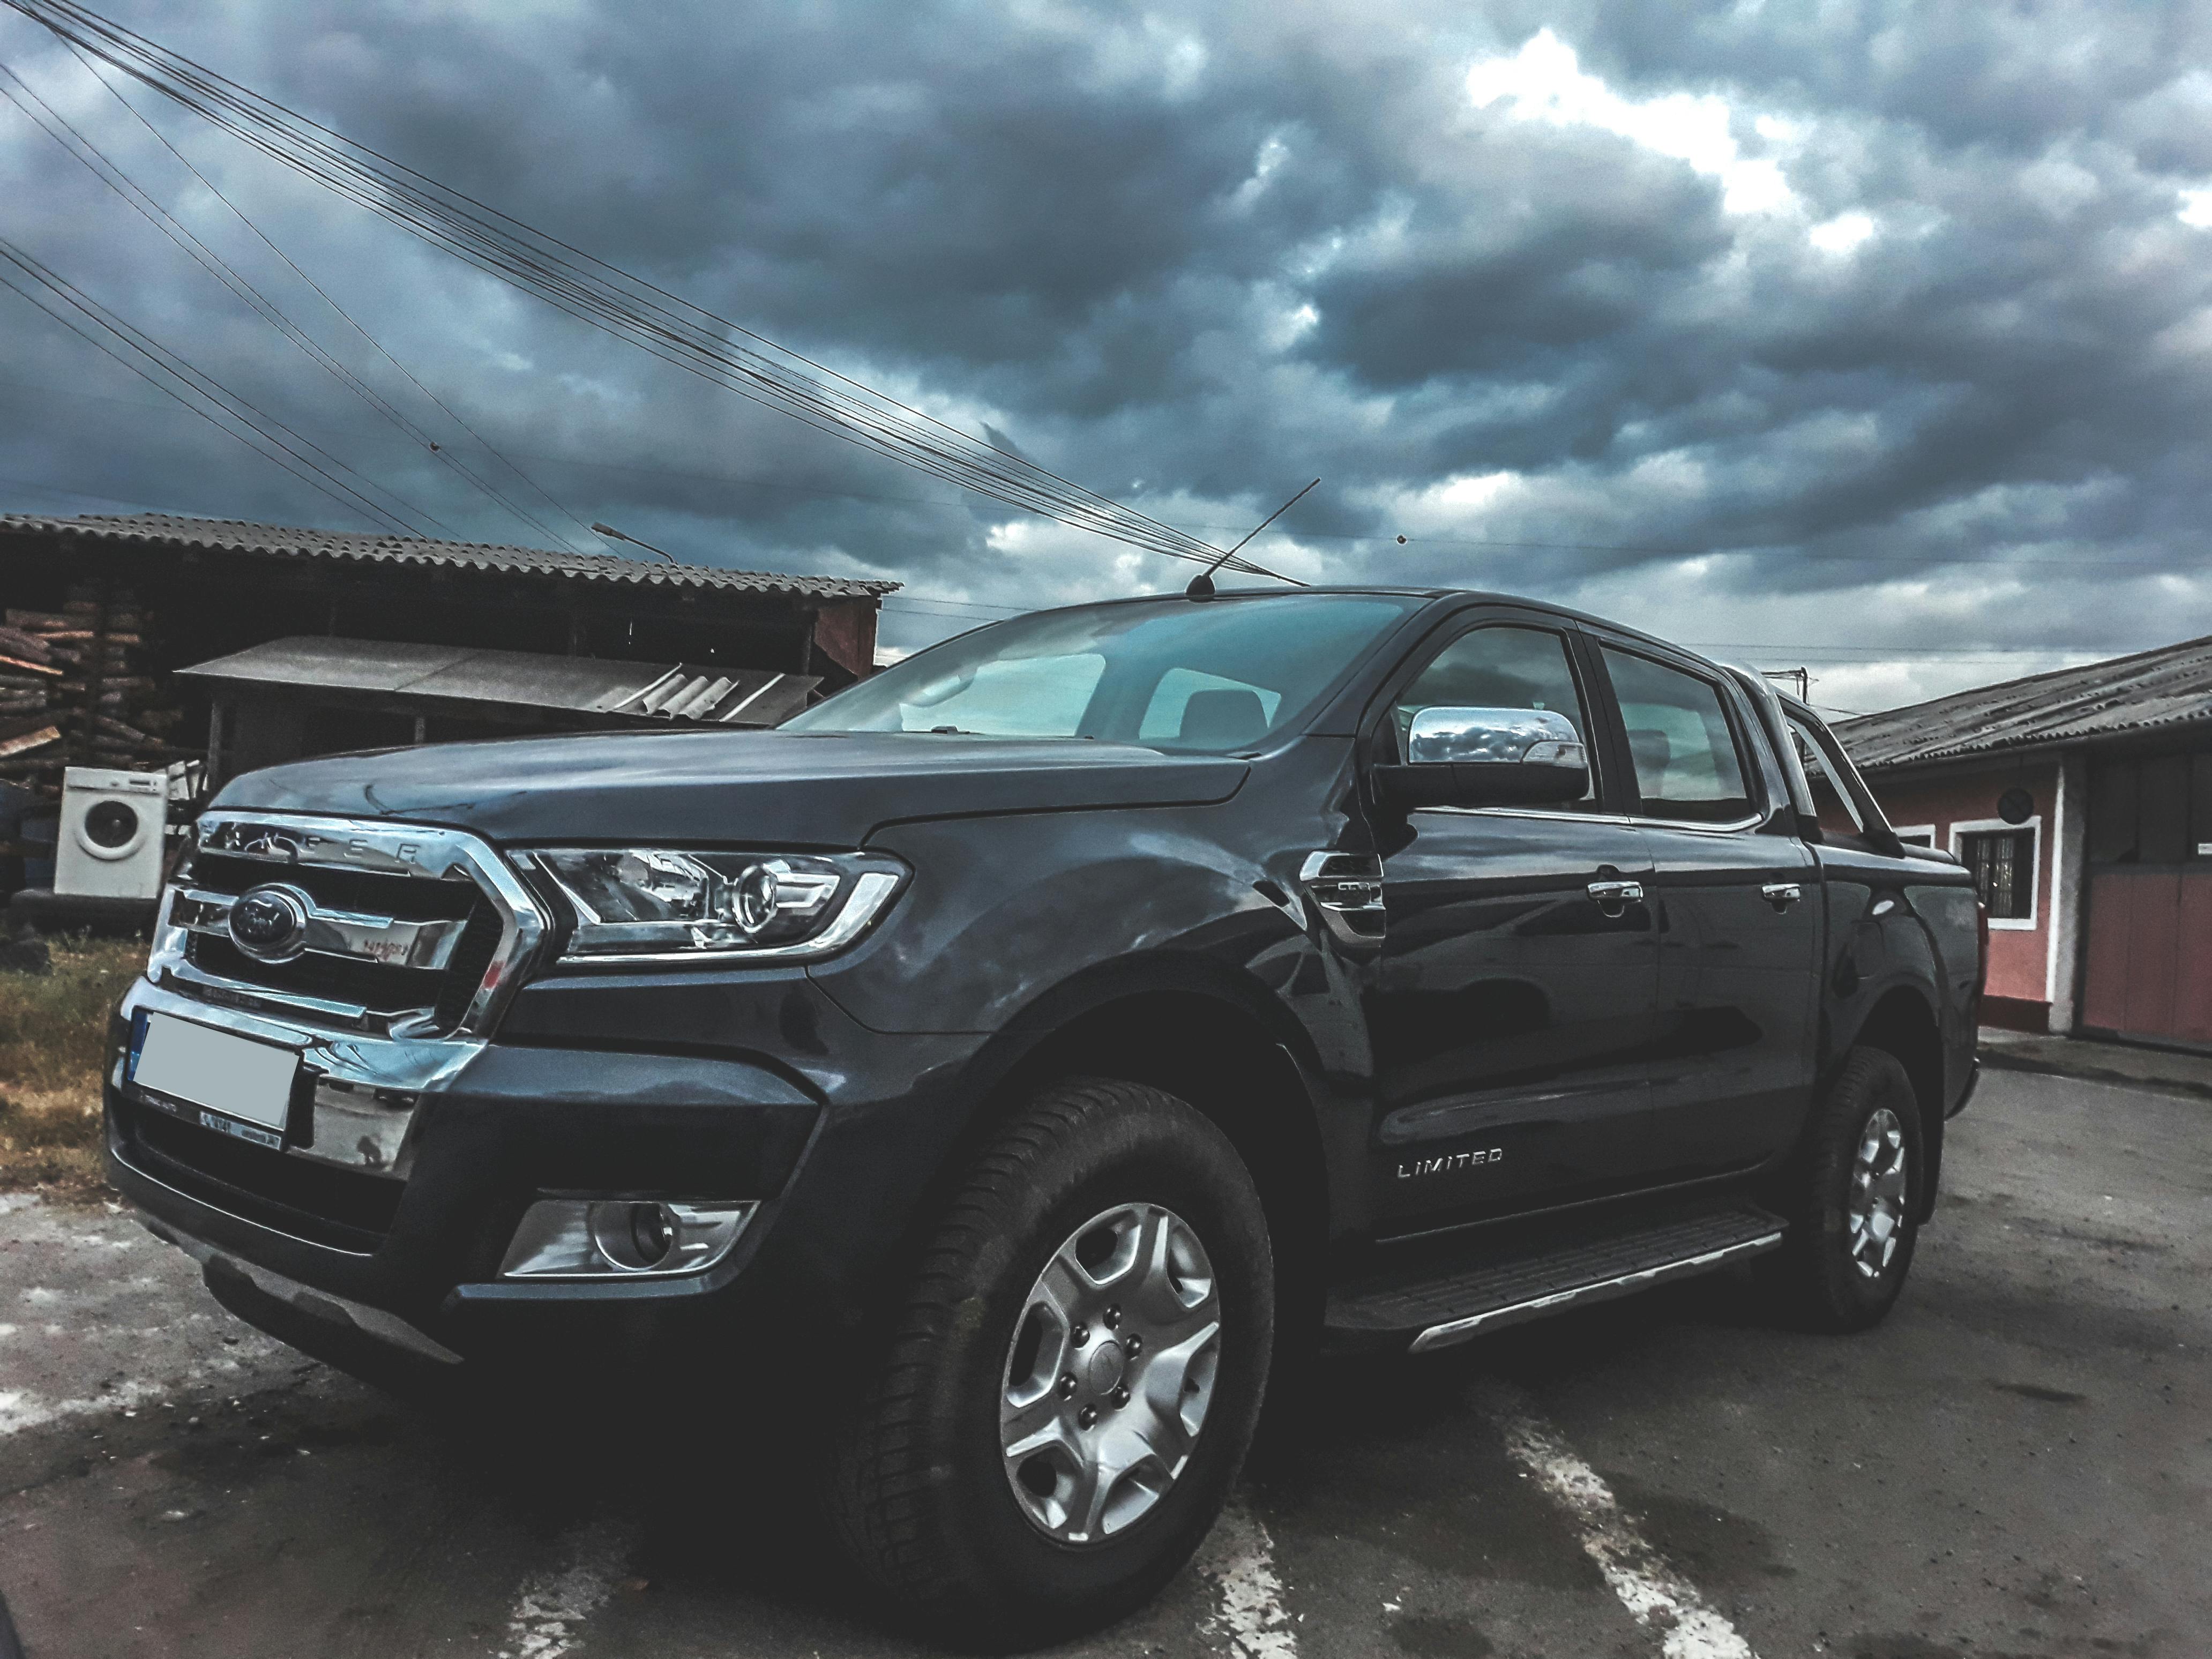 Free stock photo of car, dark clouds, ford